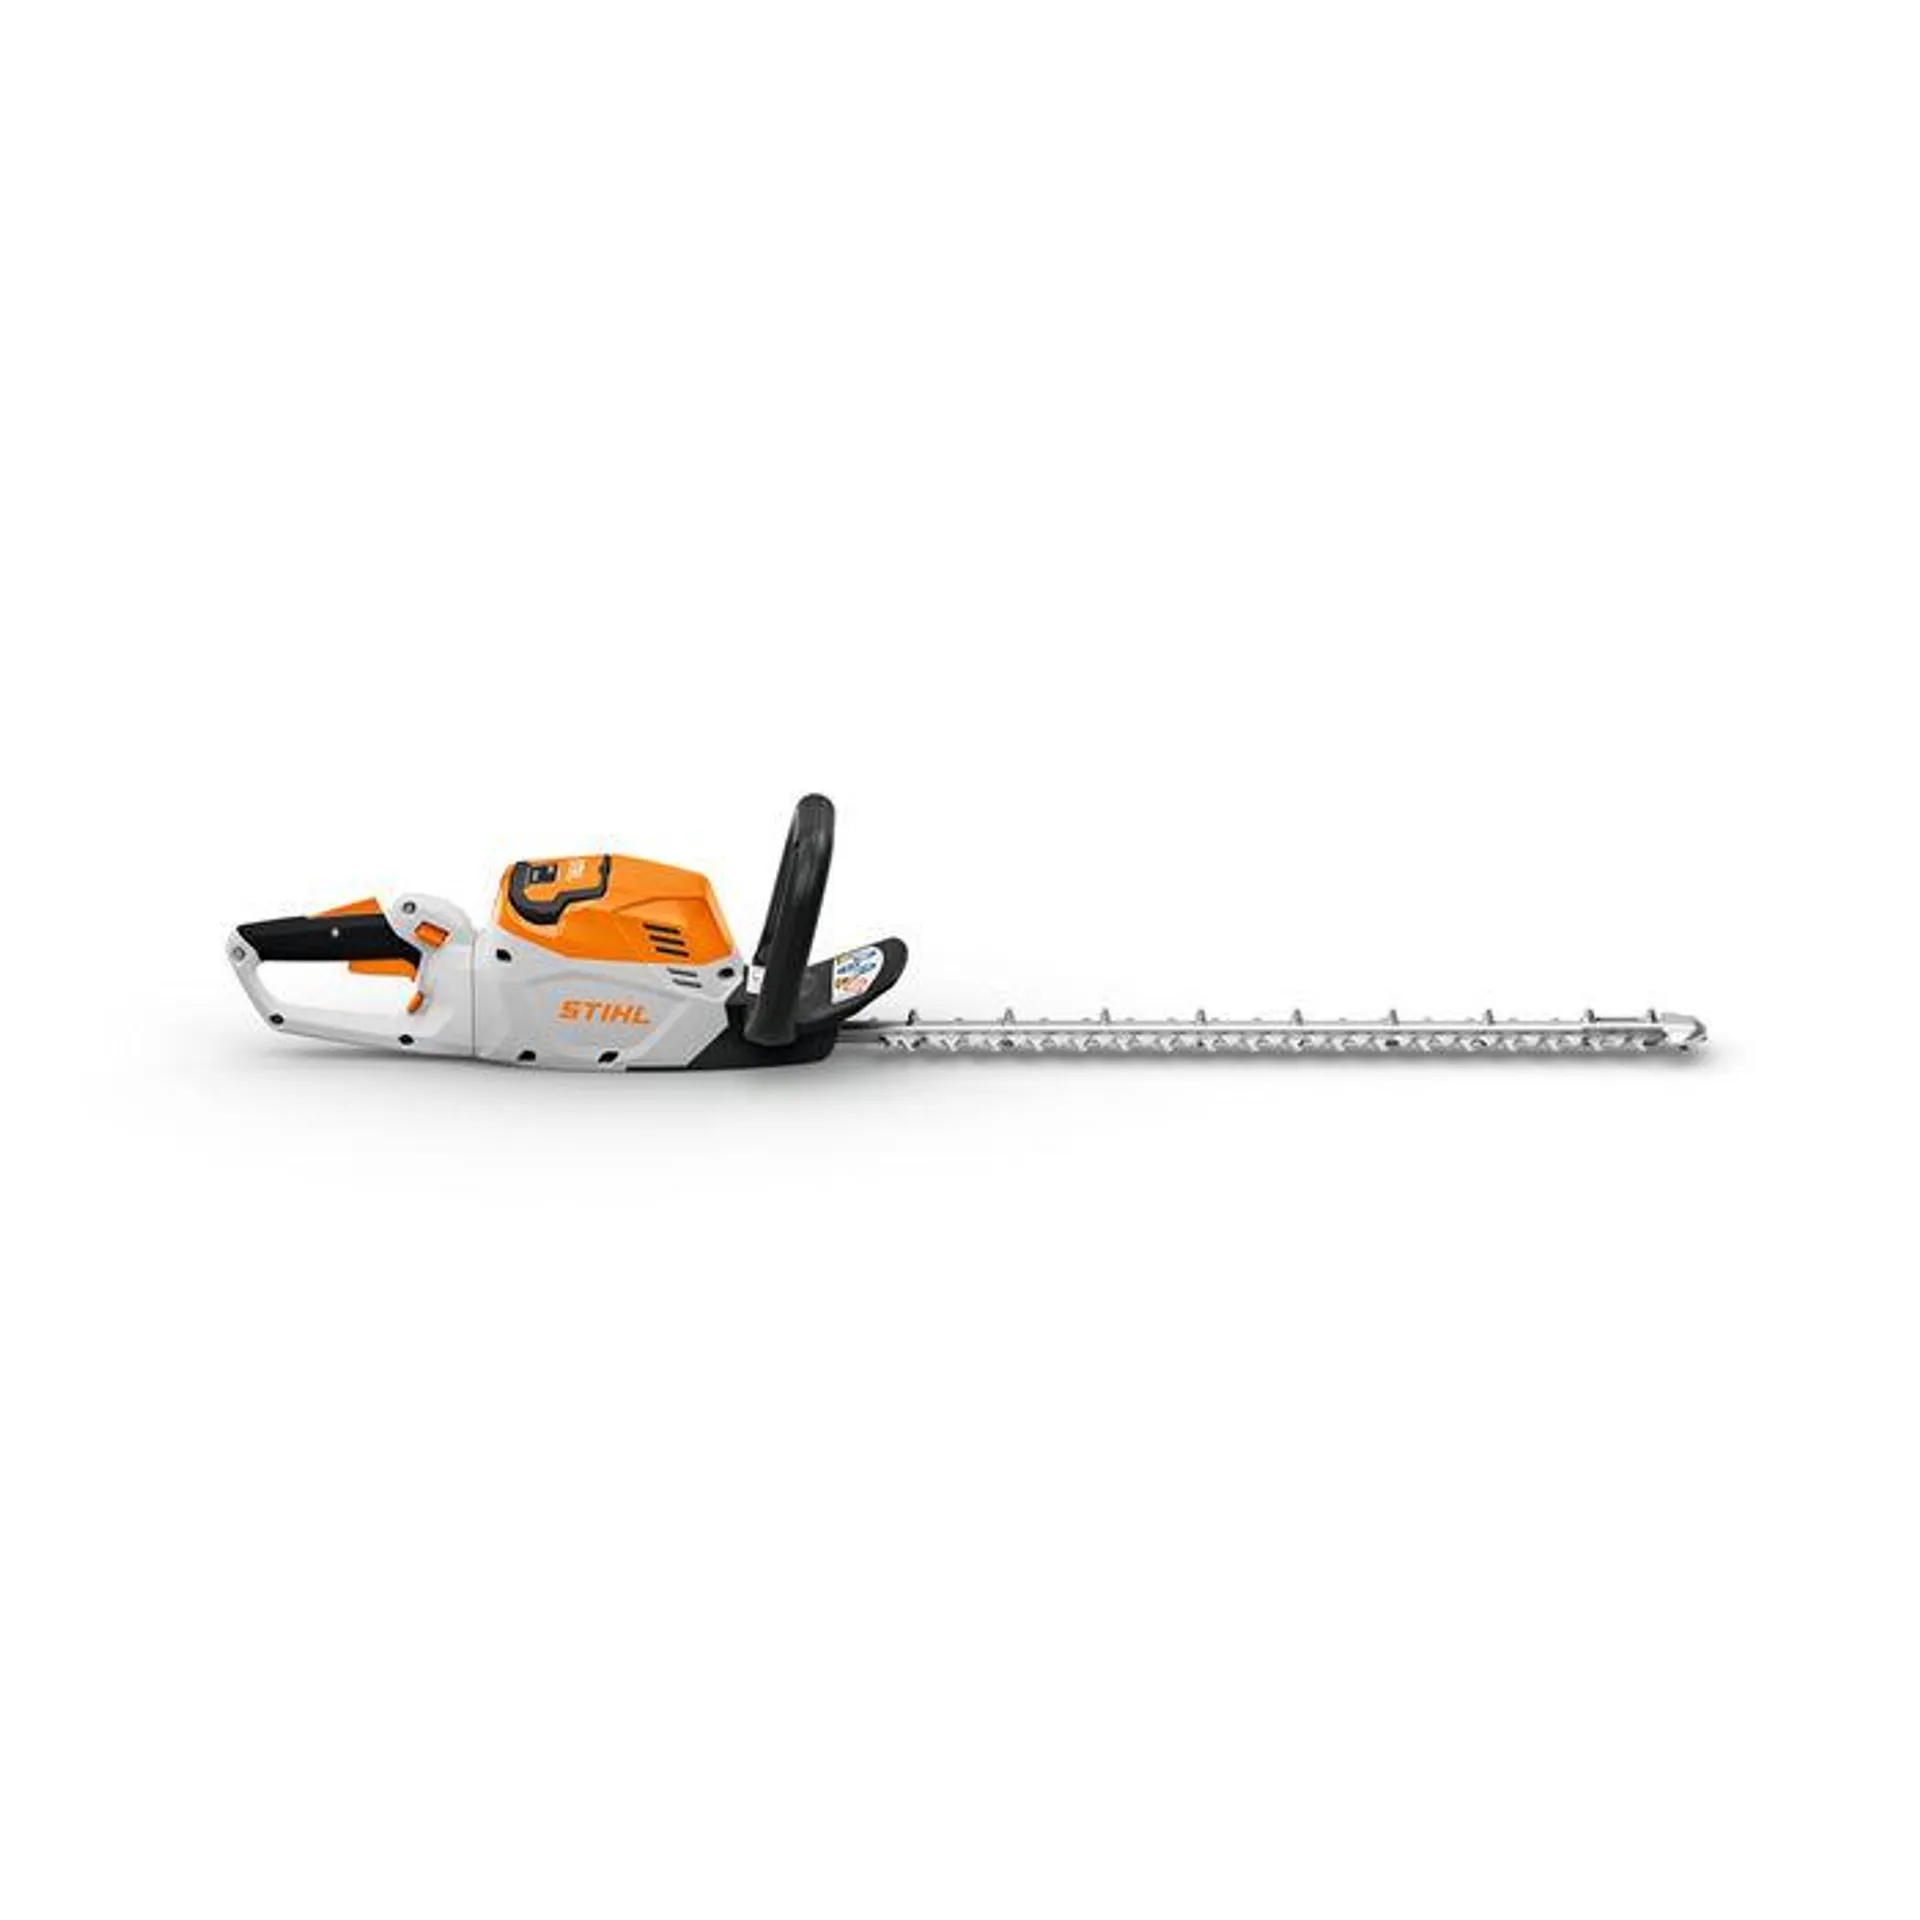 STIHL HSA 60 Battery Hedgetrimmer Tool (No Battery & Charger)